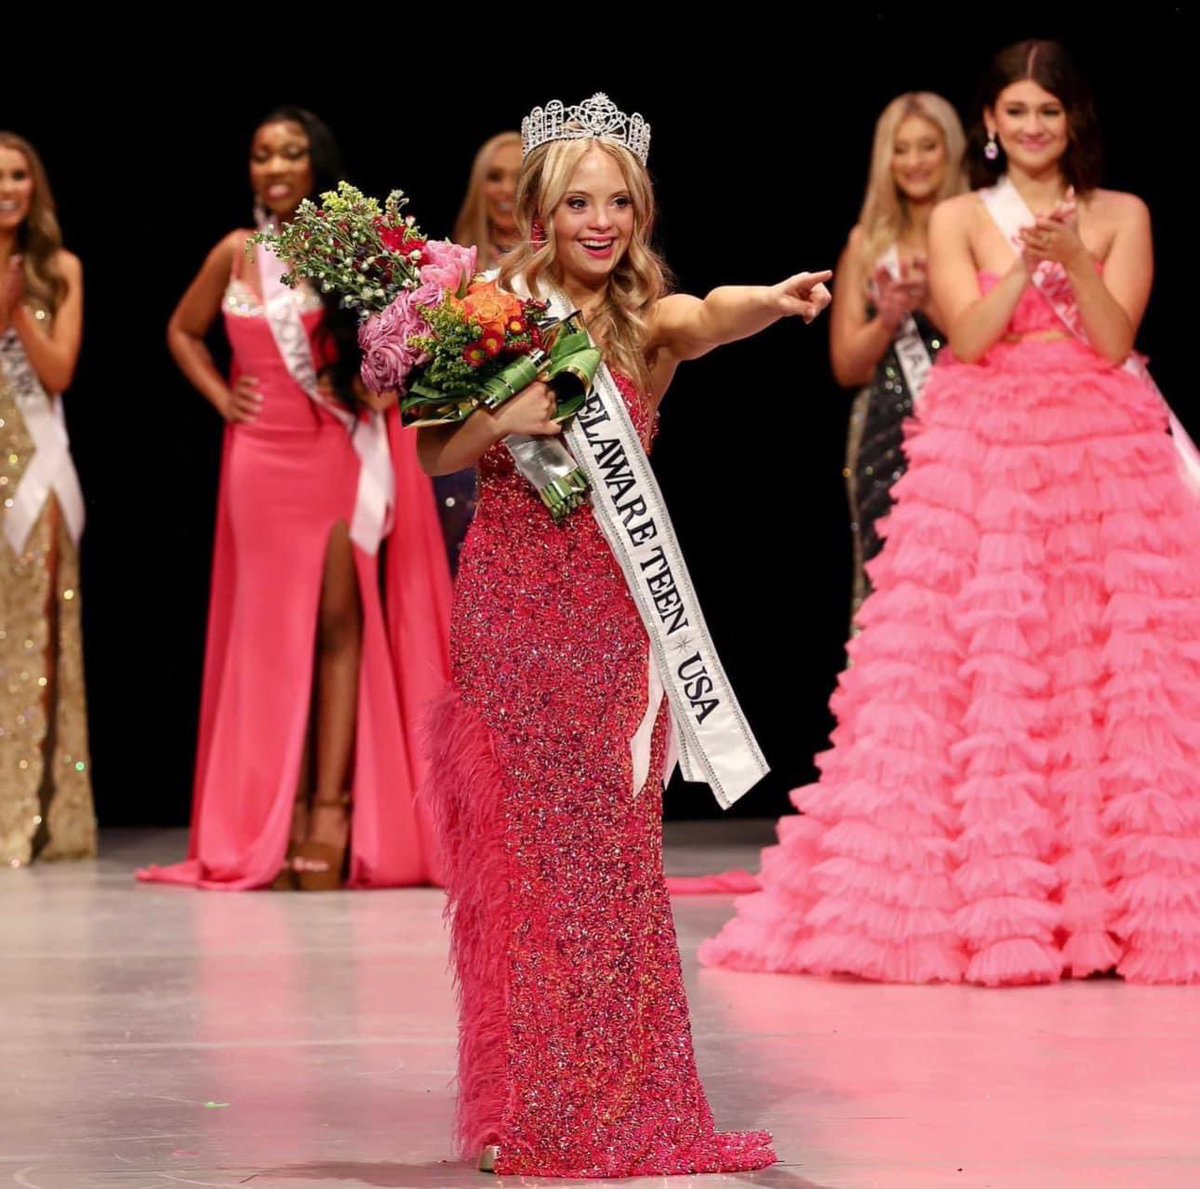 Congratulations to Kayla Kosmalski, the new Miss Delaware Teen USA! The high school senior is the first with Down syndrome to win the title. She will now head to the national stage to compete in the Miss Teen USA Pageant on August 1 which will be broadcast live on the CW Network.